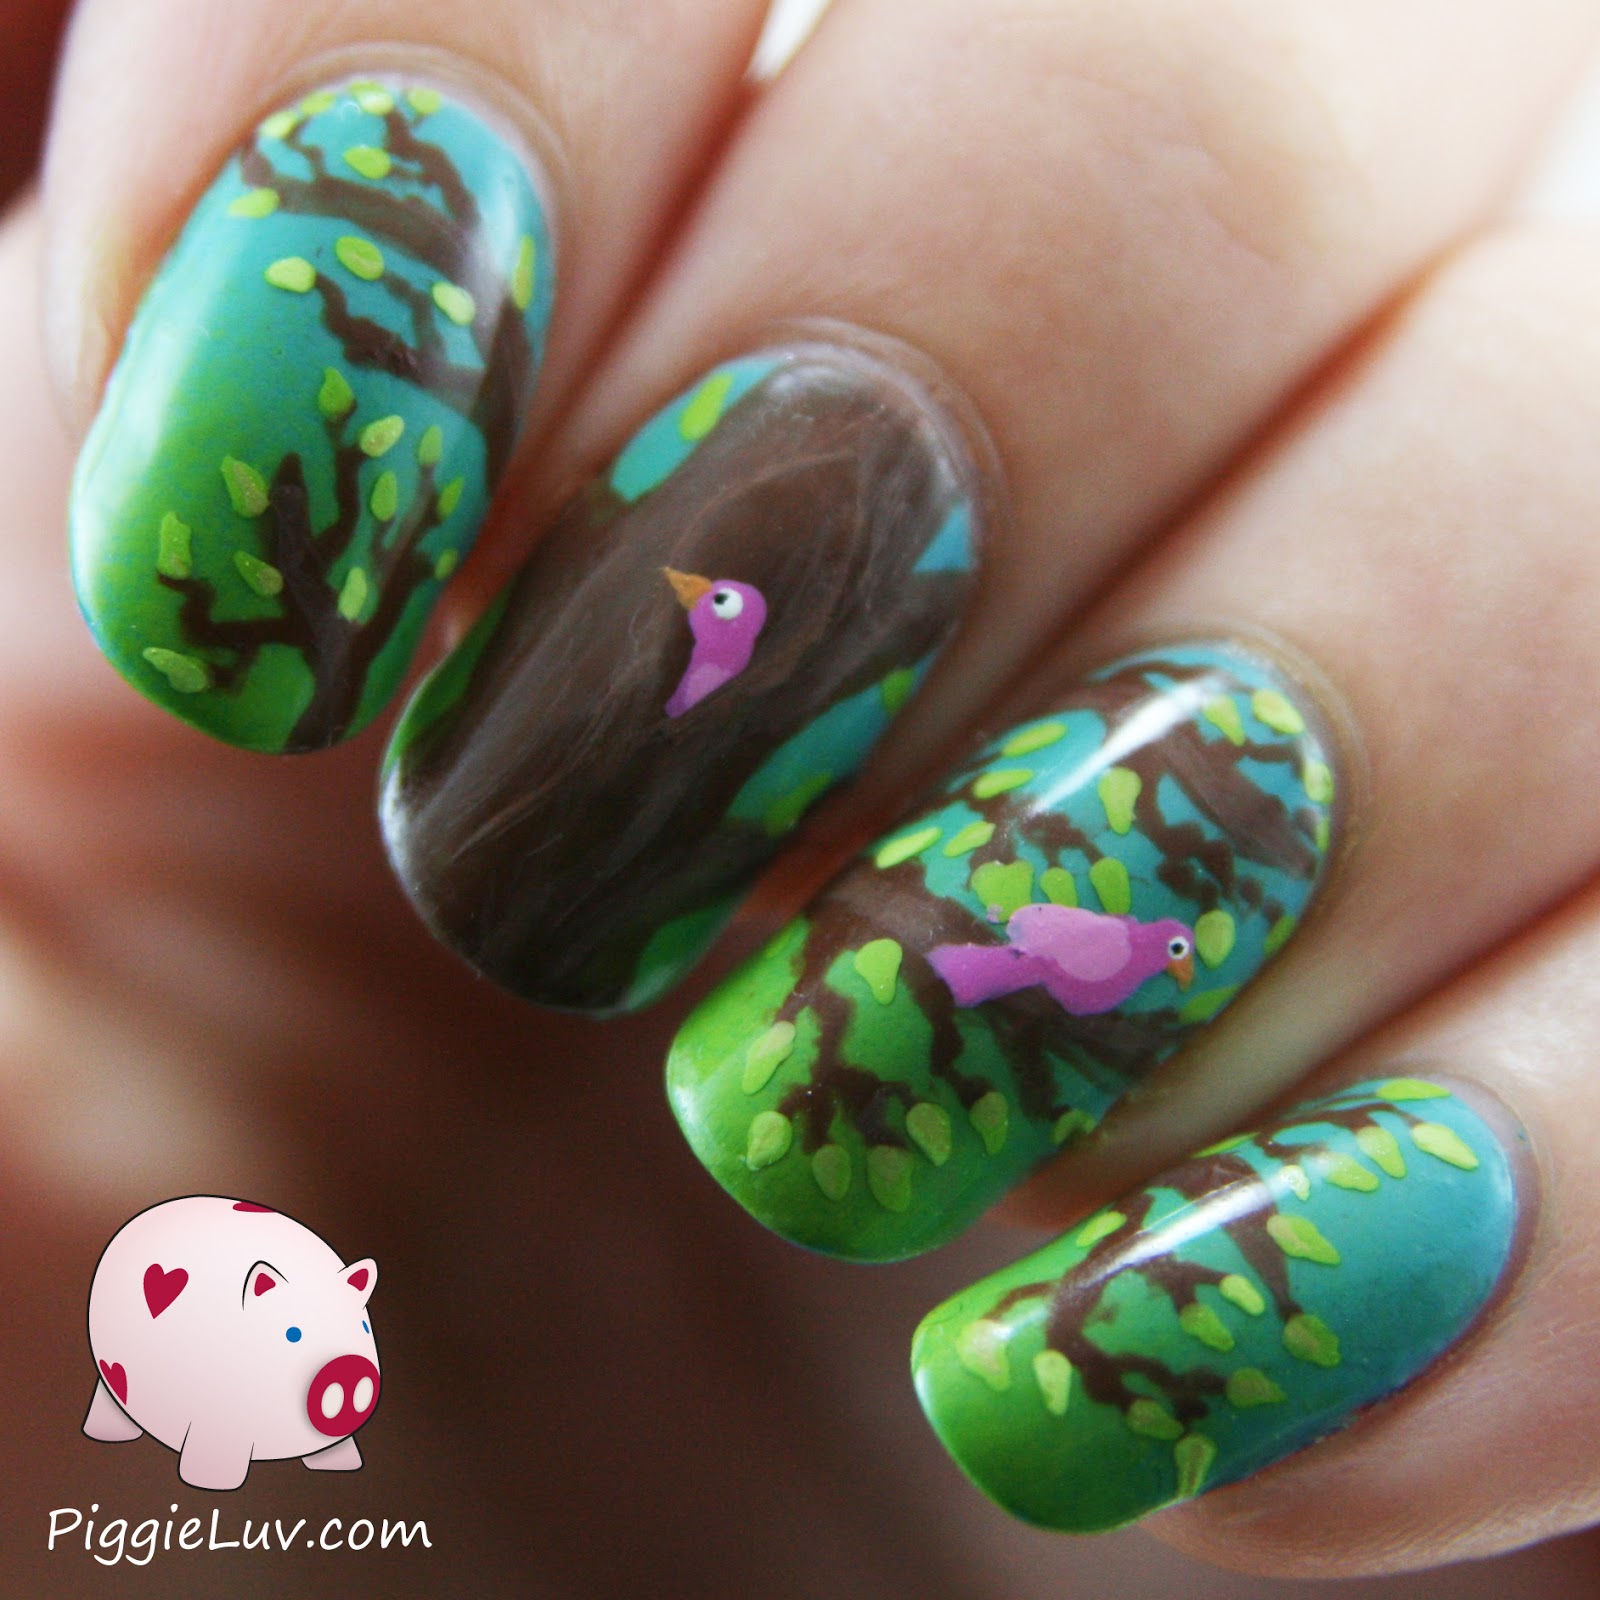 PiggieLuv: Look what I made with Kiss nail art pens!